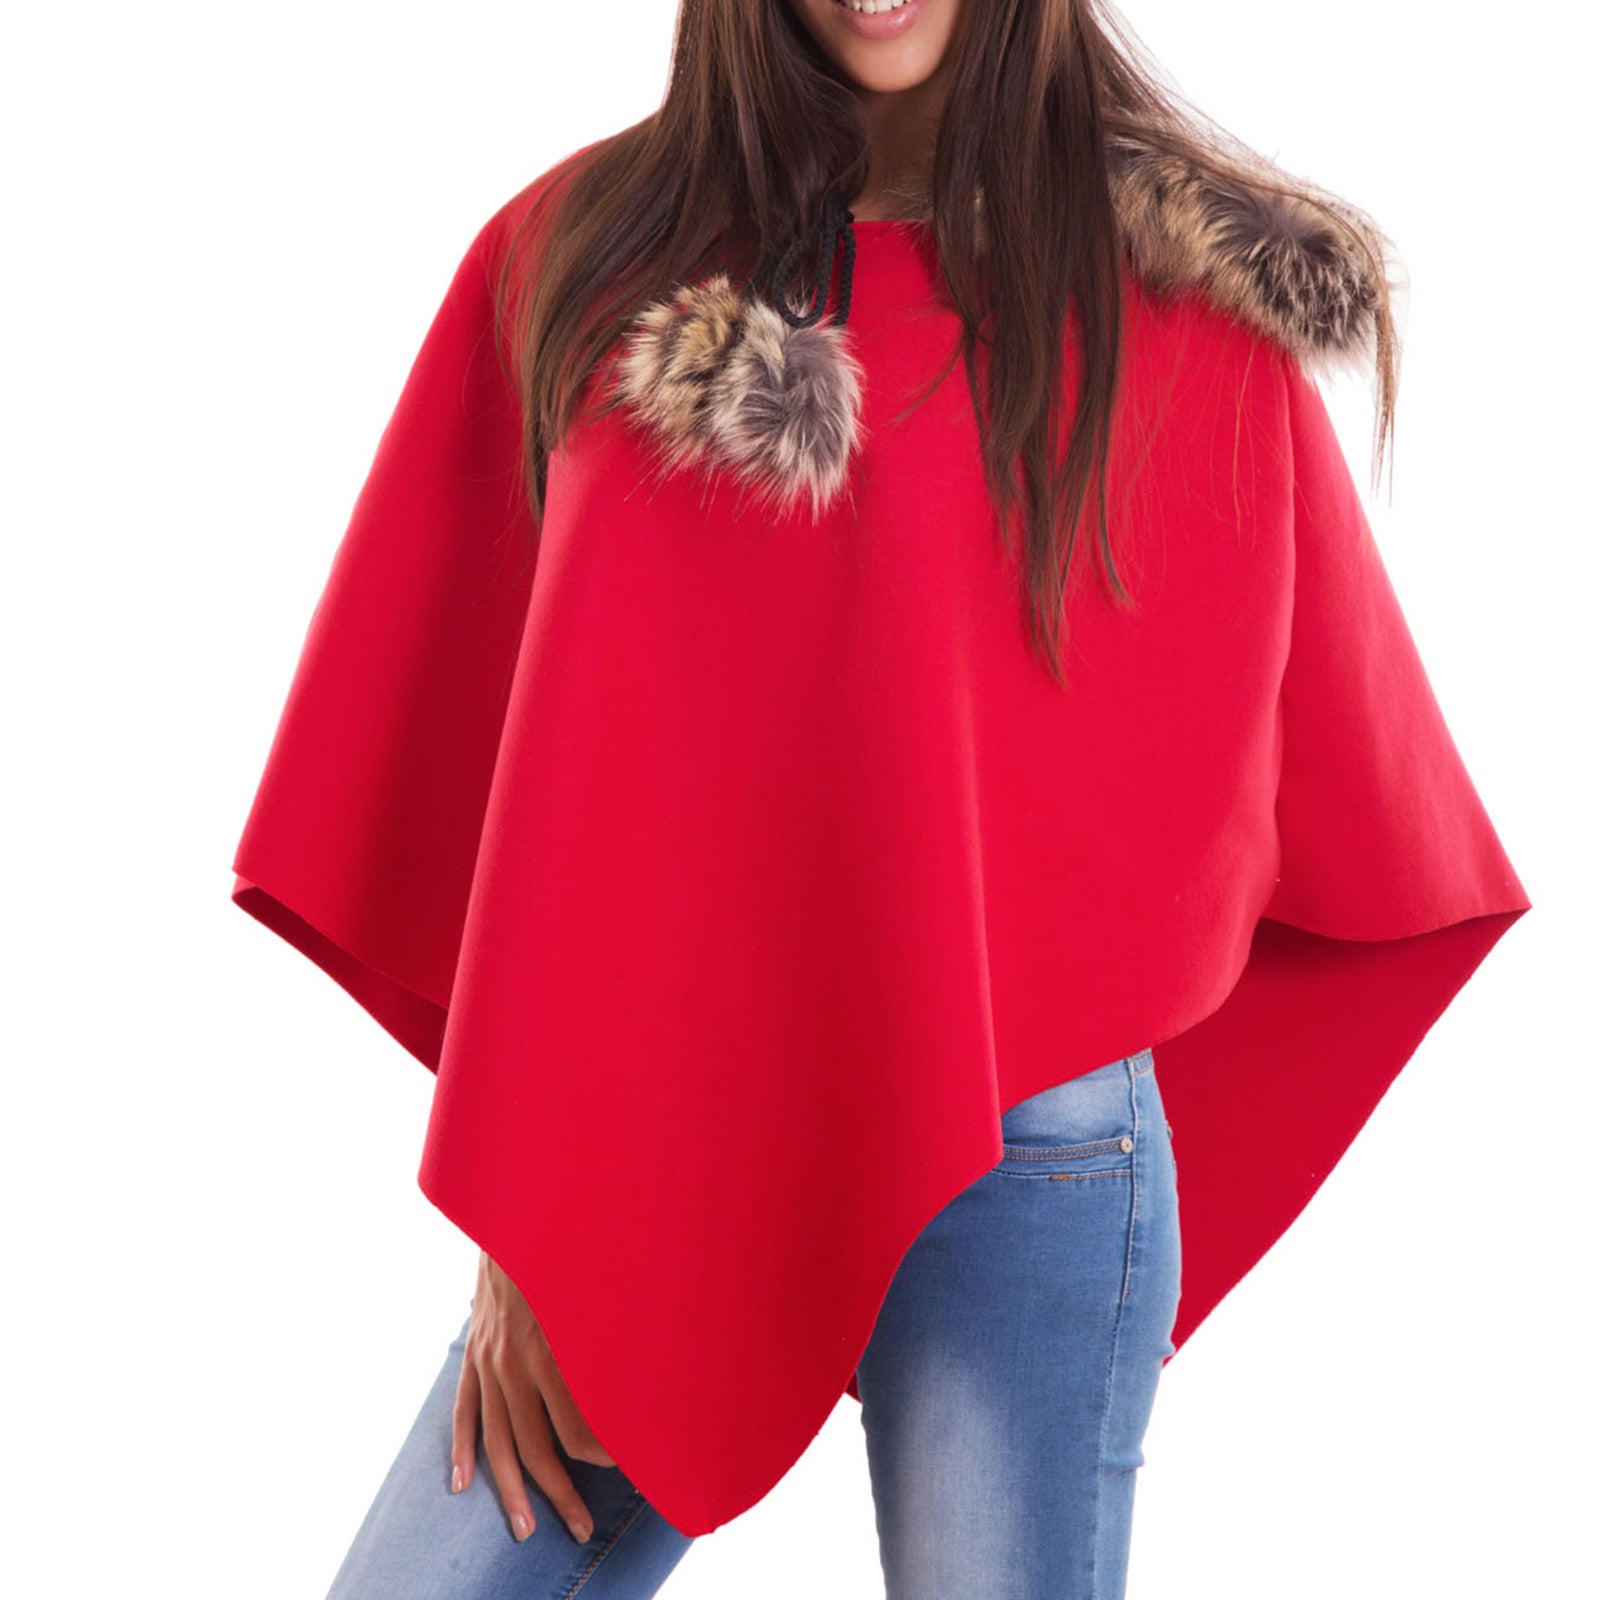 immagine-1-toocool-poncho-donna-giacca-coprispalle-as-2346